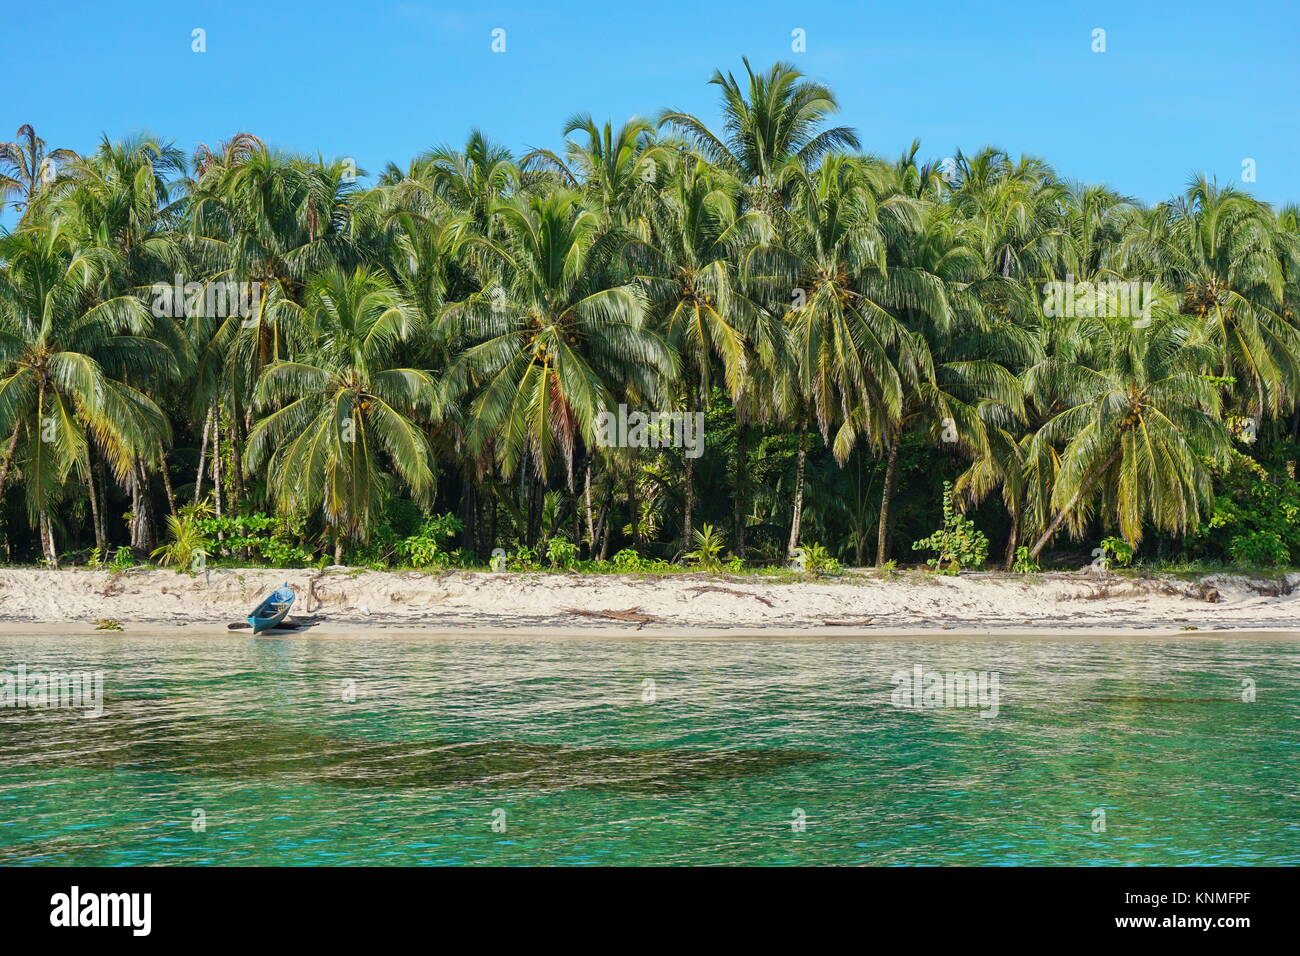 Lush tropical beach with coconut palm trees and a wooden dugout canoe on the sand, Caribbean sea, Bocas del Toro, Panama, Central America Stock Photo